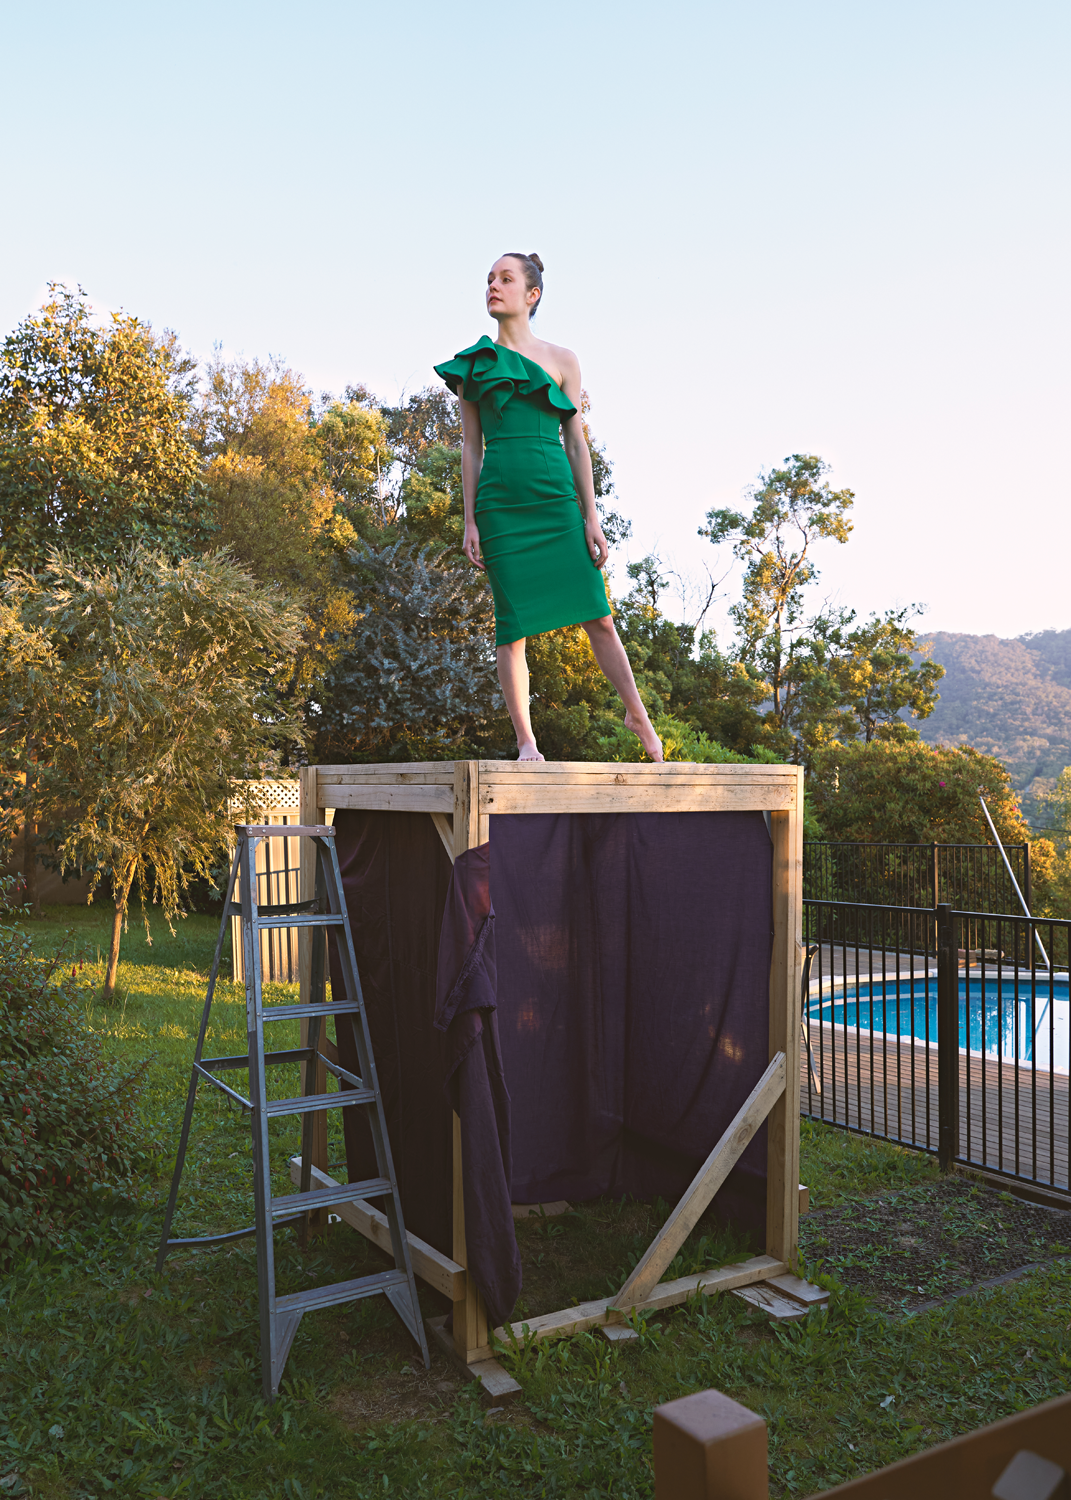 Colour video still of barefoot woman in green dress standing on perspex platform structure in suburban front yard.